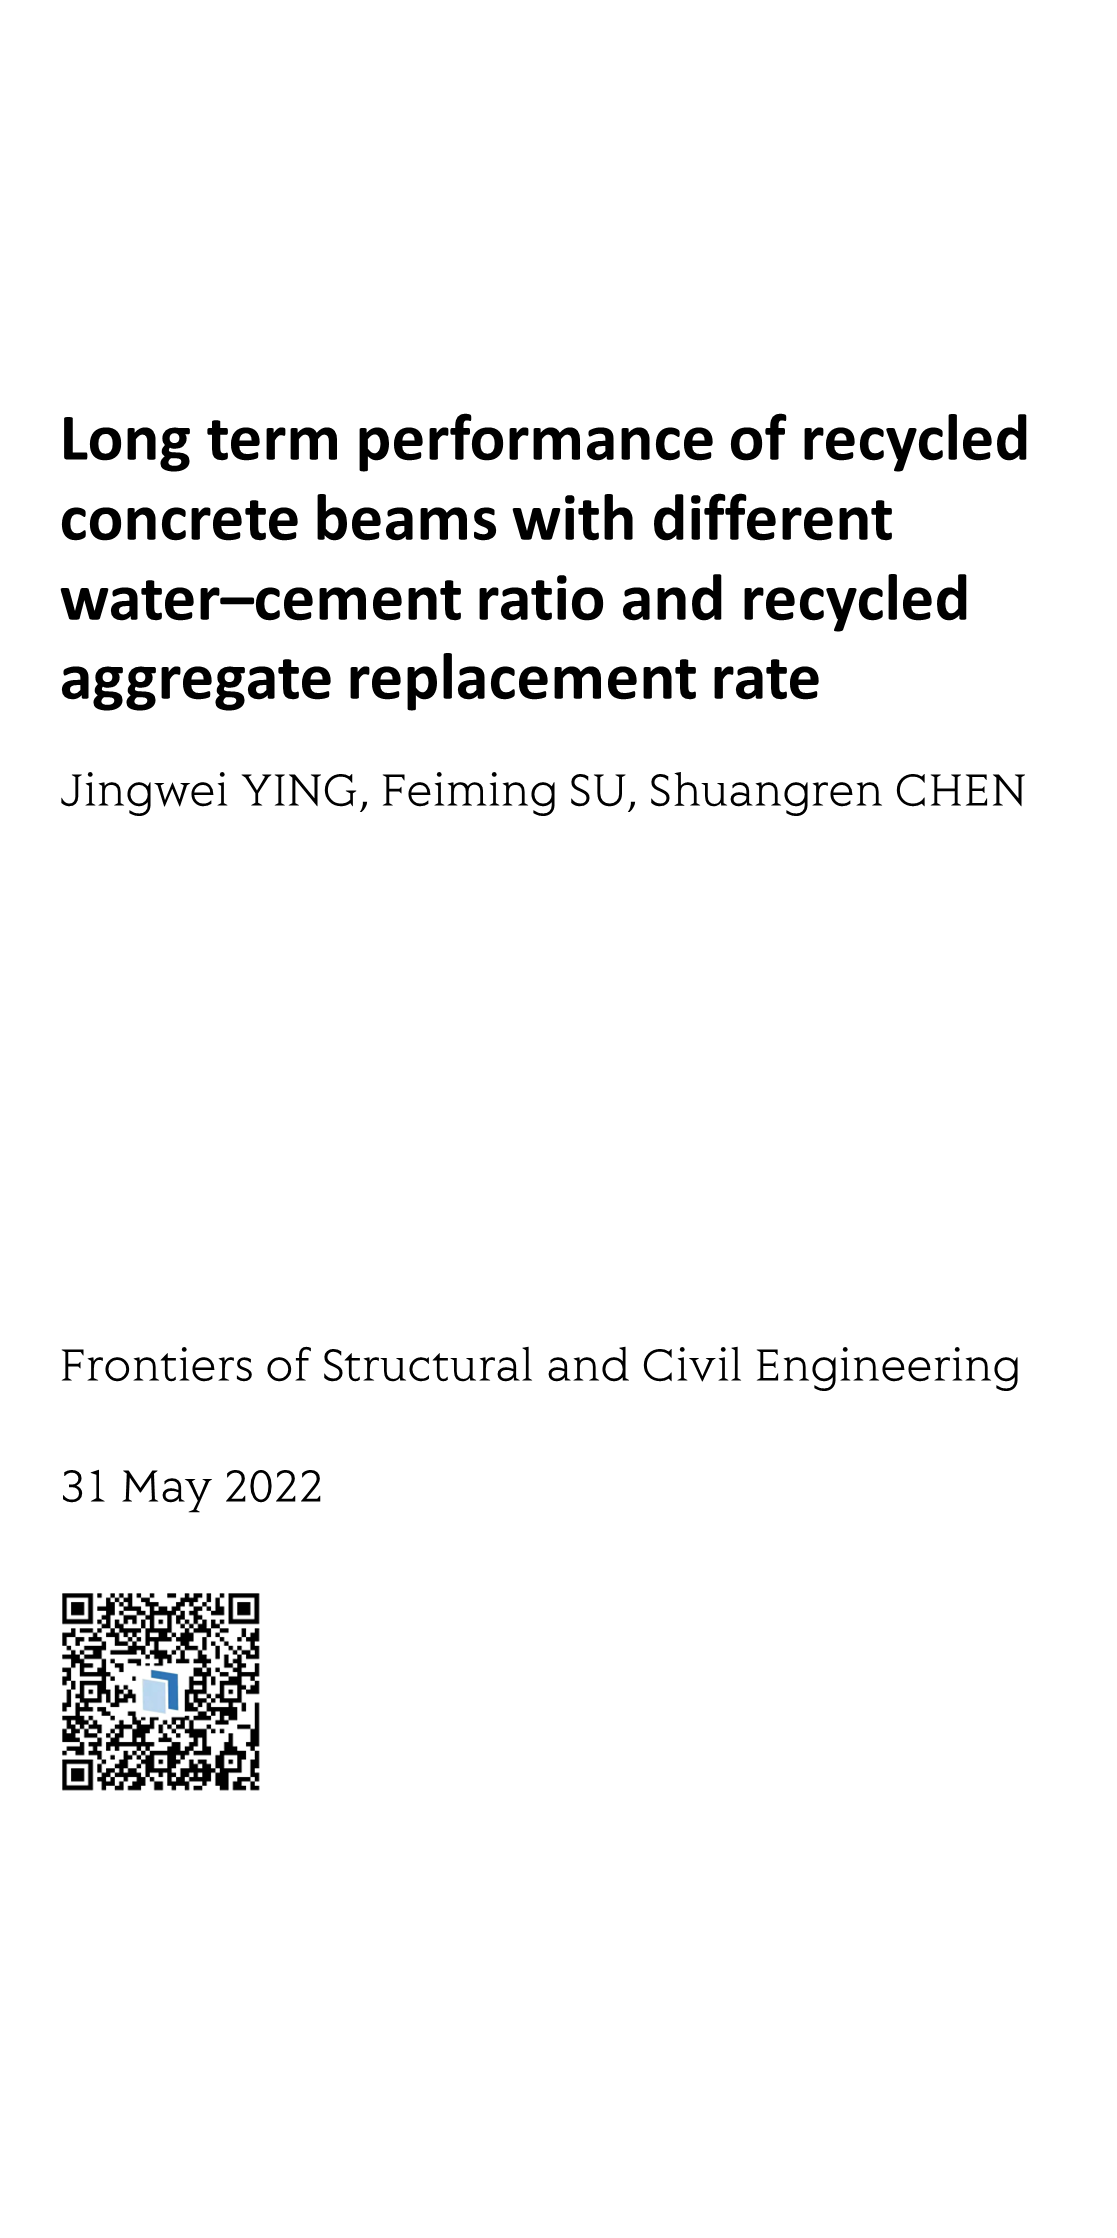 Long term performance of recycled concrete beams with different water–cement ratio and recycled aggregate replacement rate_1